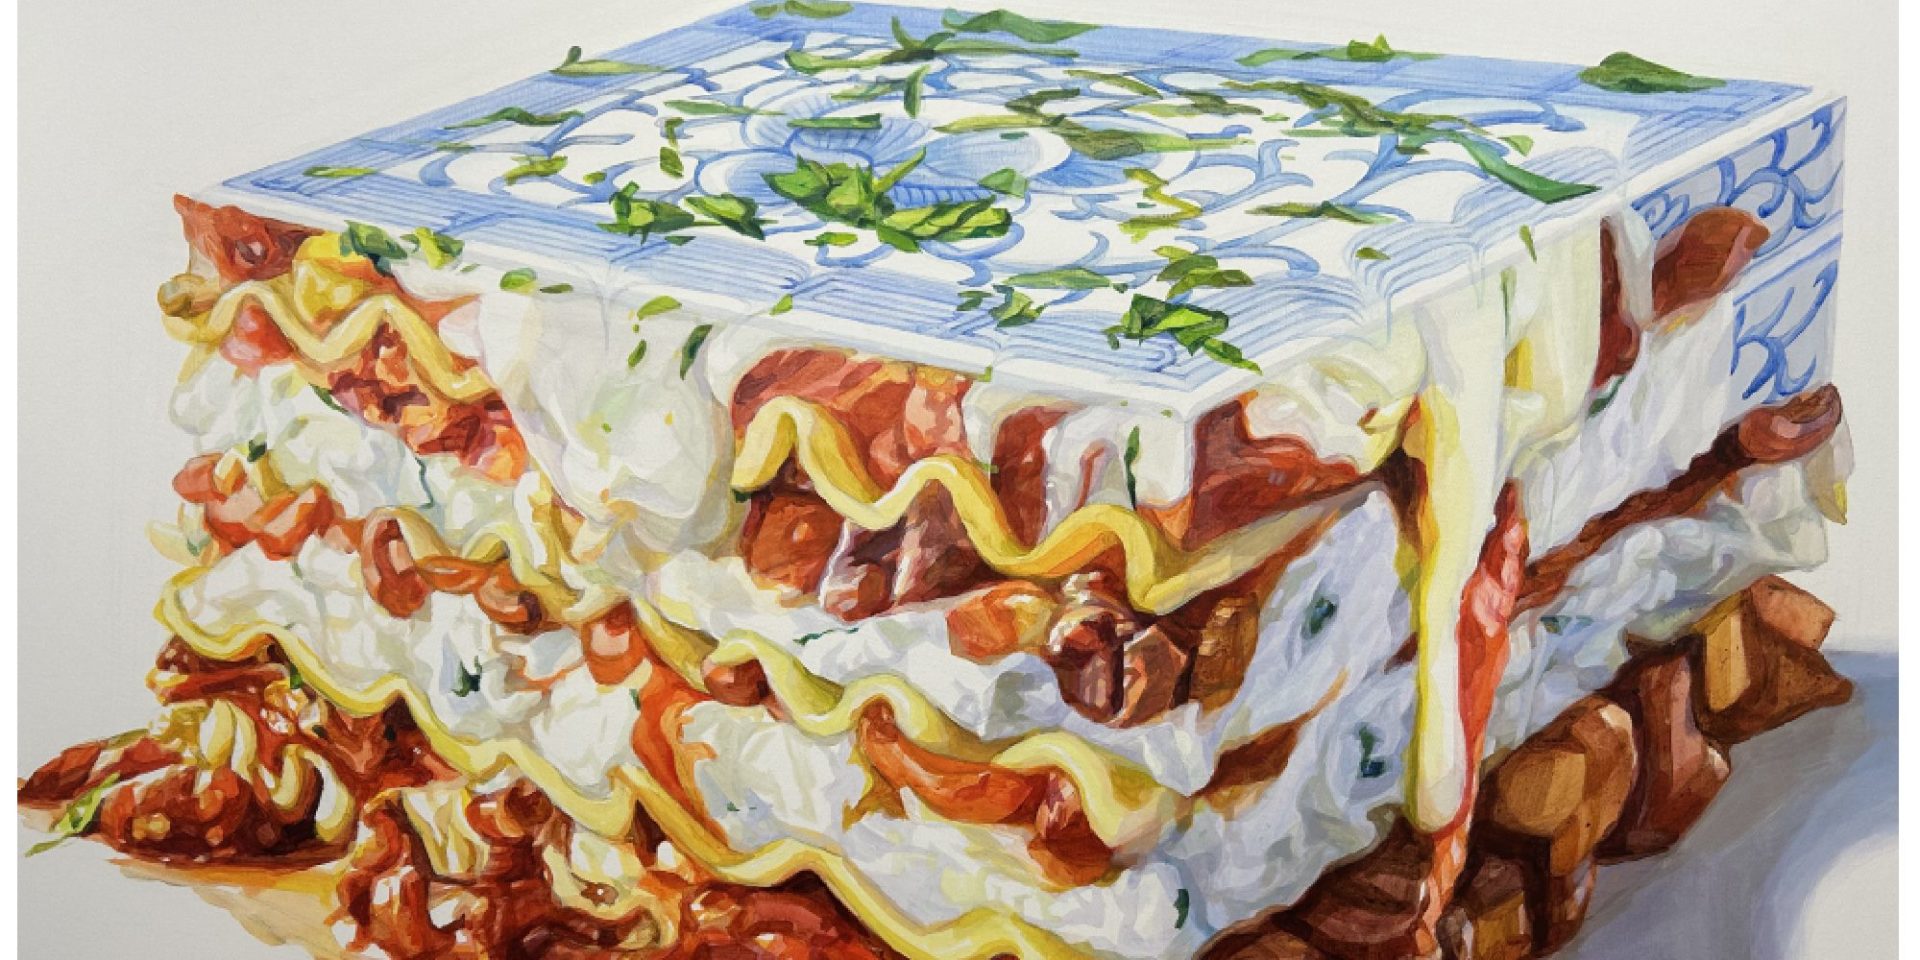 Drawing of cartoonish lasagna with red and white layers of cheese and meat, topped with blue and white Chinese ornamental plate decor with green leaf petals dropped on top.